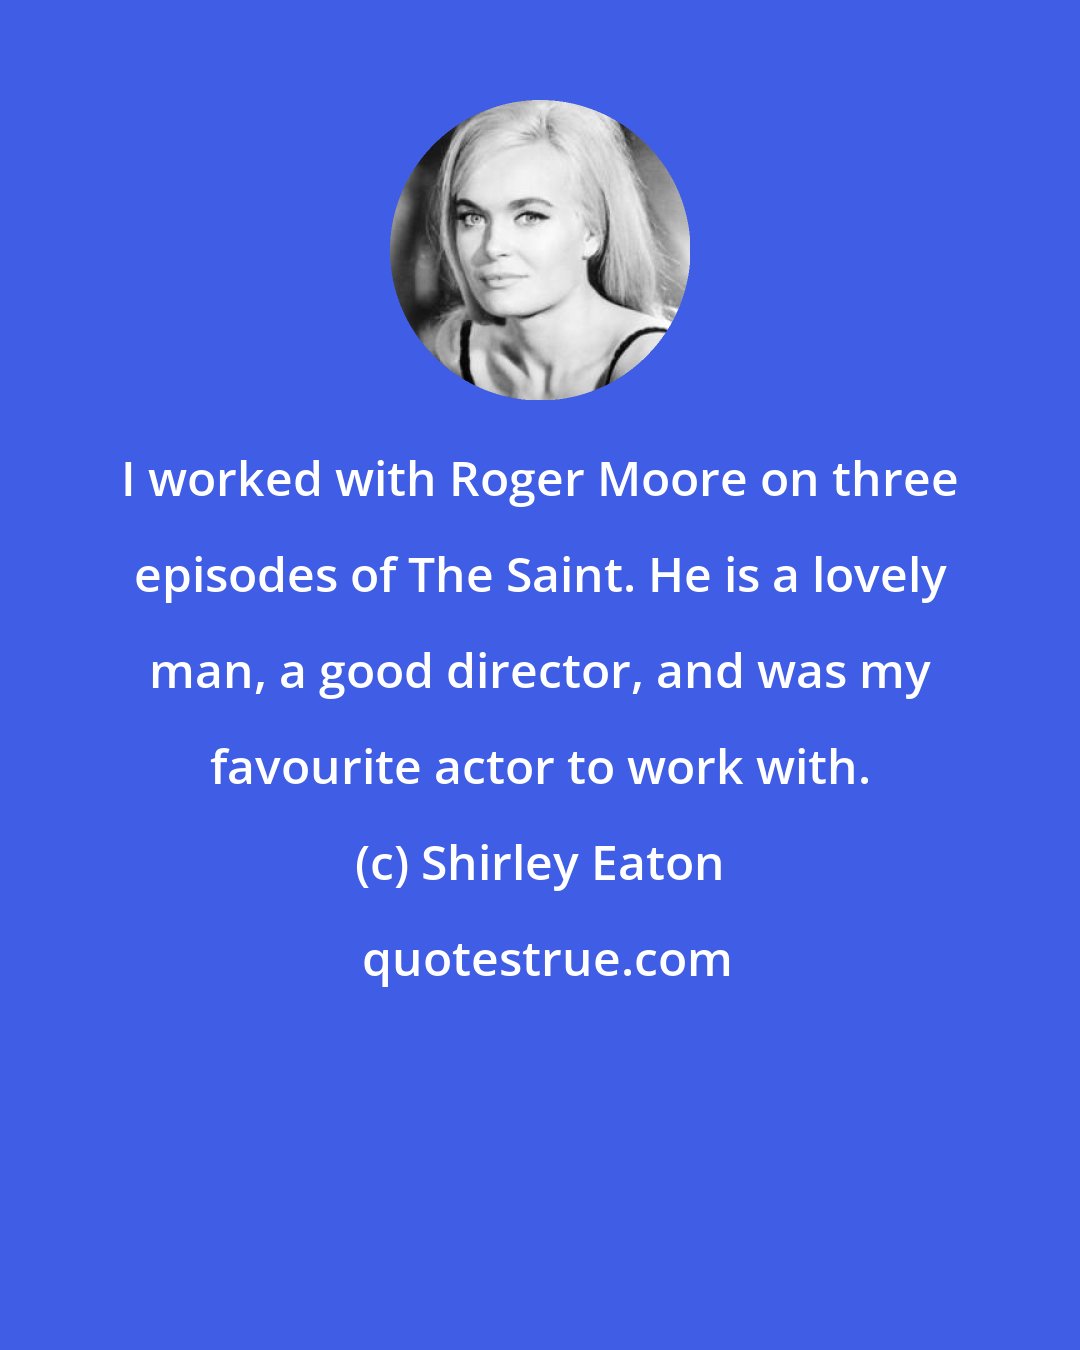 Shirley Eaton: I worked with Roger Moore on three episodes of The Saint. He is a lovely man, a good director, and was my favourite actor to work with.